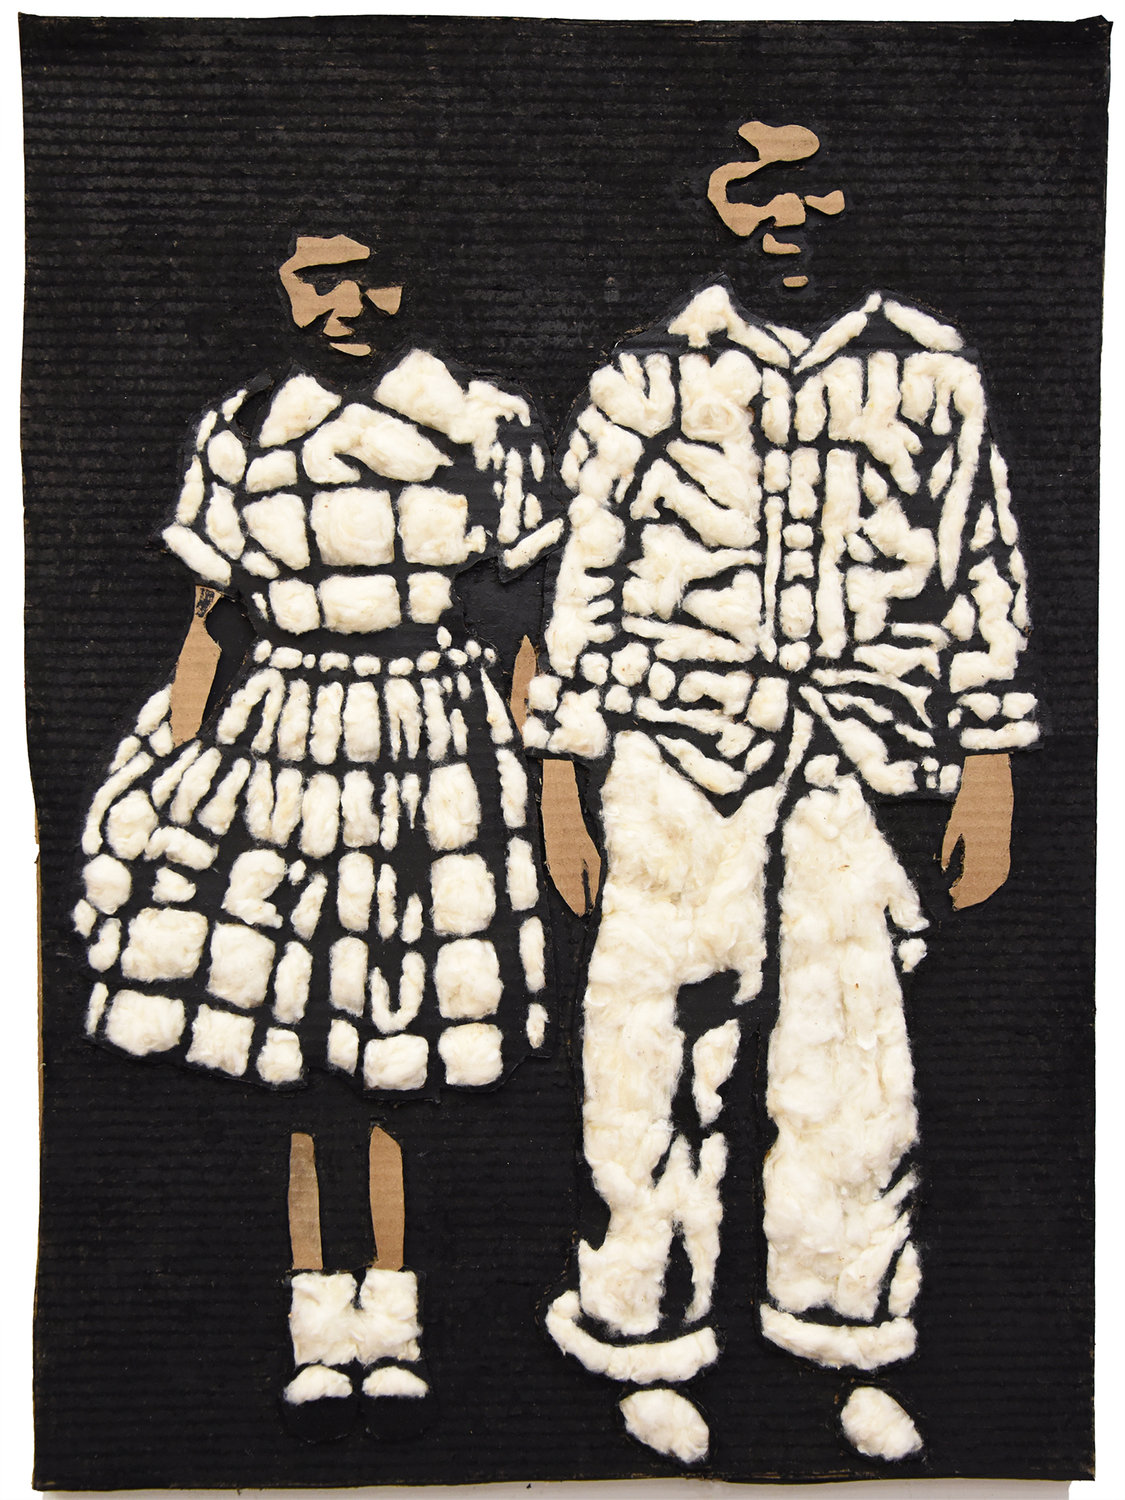 “Hermana/Hermano” by Gina Gwen Palacios, flashe paint on carved cardboard, 10 x 11.5 inches, 2018.